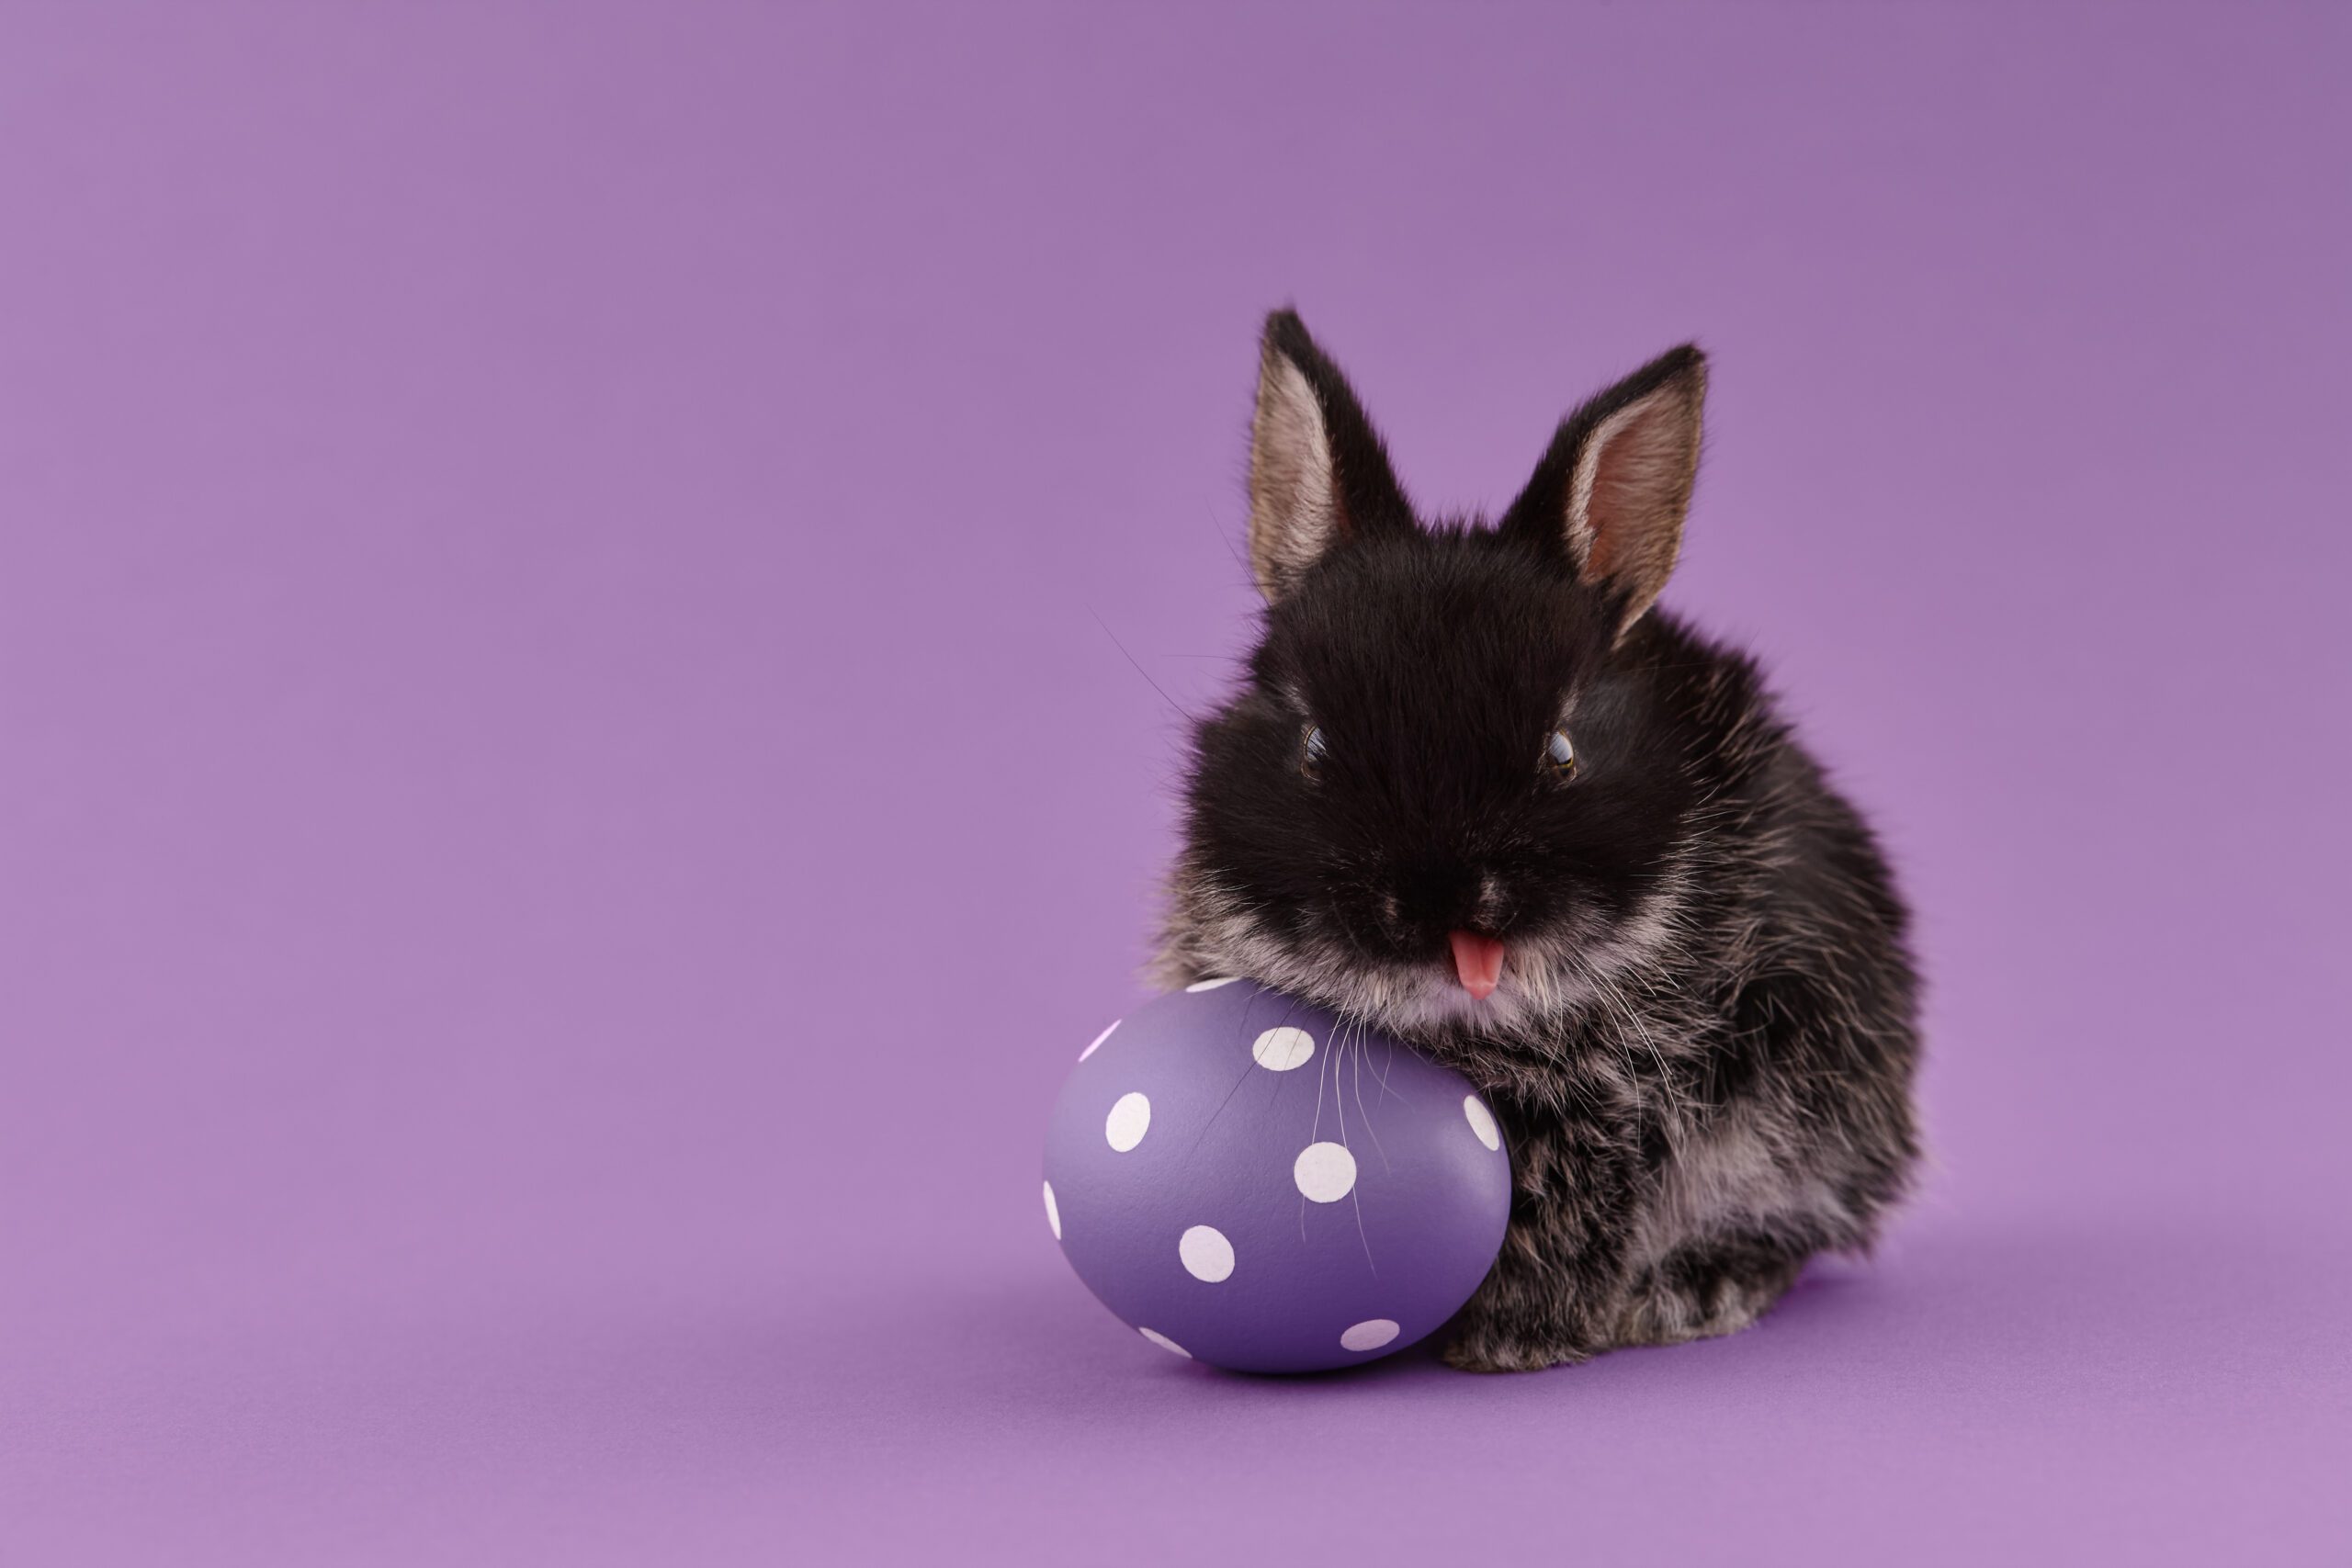 A black bunny which is sticking its tongue out sits very close to a purple egg with white polka dots.